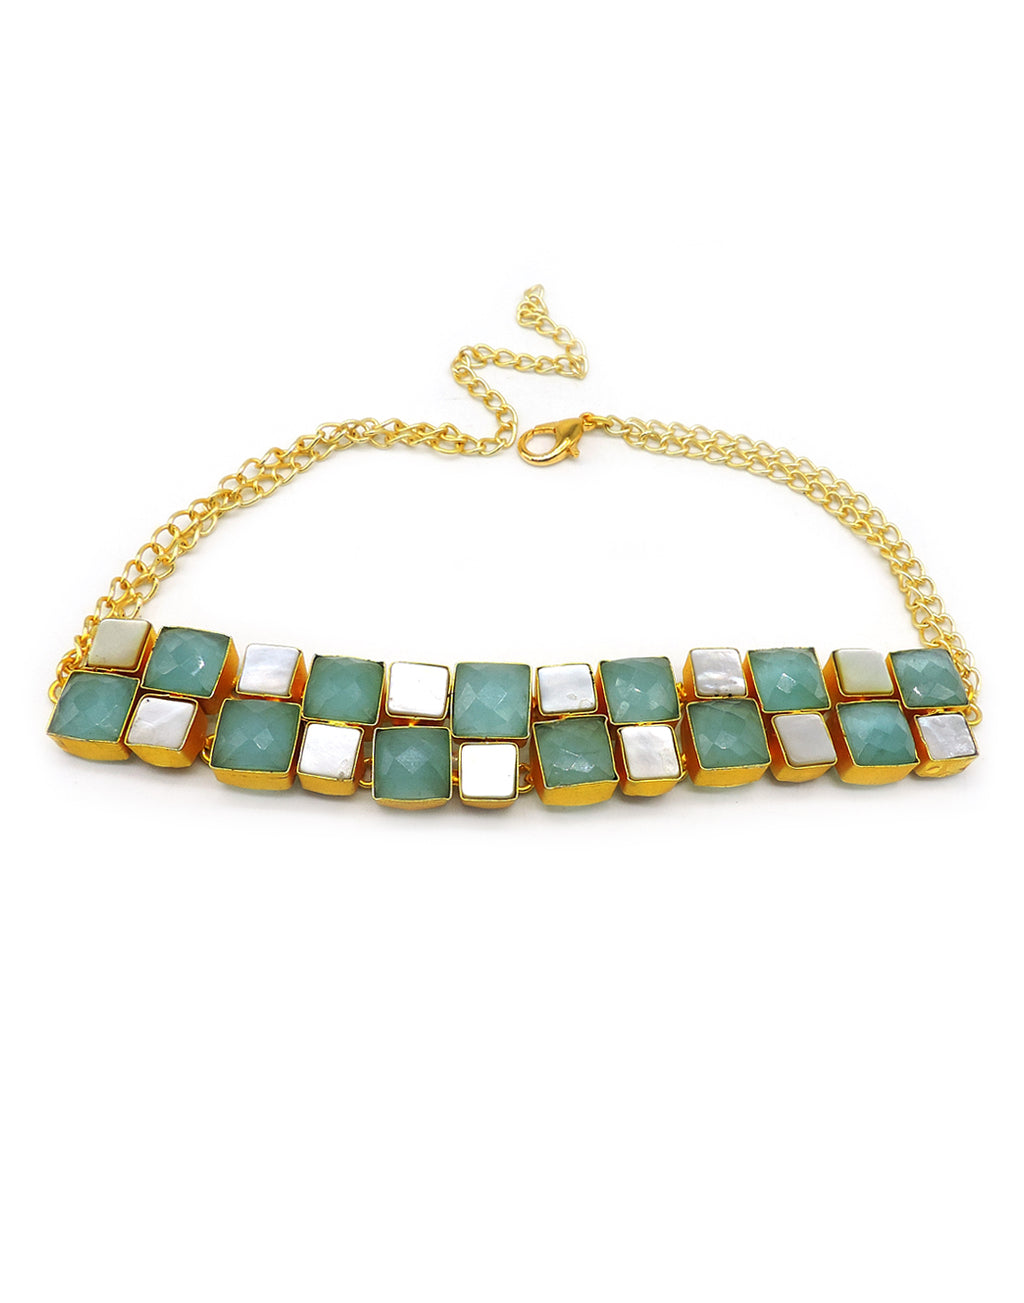 Square Row Choker - Statement Necklaces - Gold-Plated & Hypoallergenic Jewellery - Made in India - Dubai Jewellery - Dori